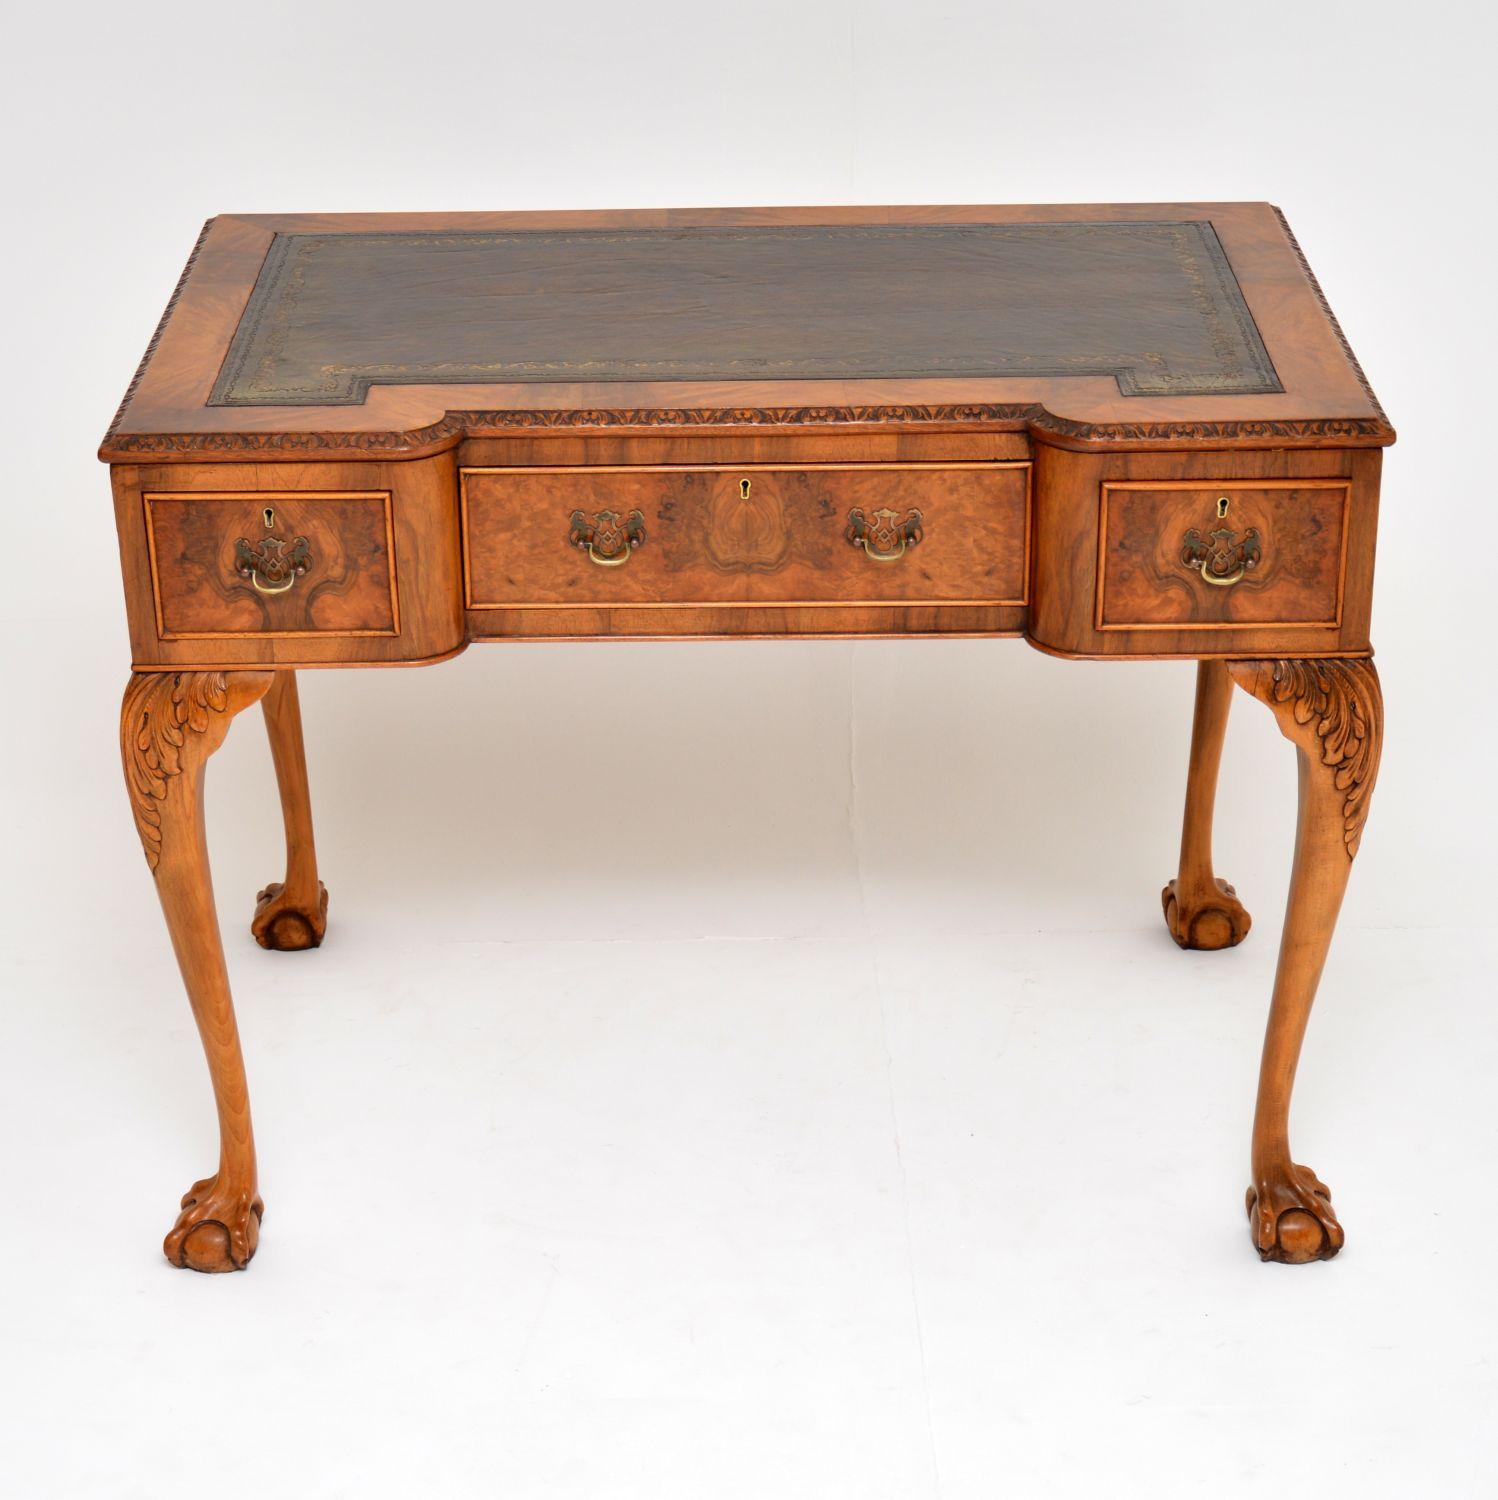 Superb quality and great looking burr walnut antique Queen Anne style desk, dating from the 1920s period and in excellent condition.

It has a hand colored tooled leather writing surface with a carved top edge all the way around. There are three